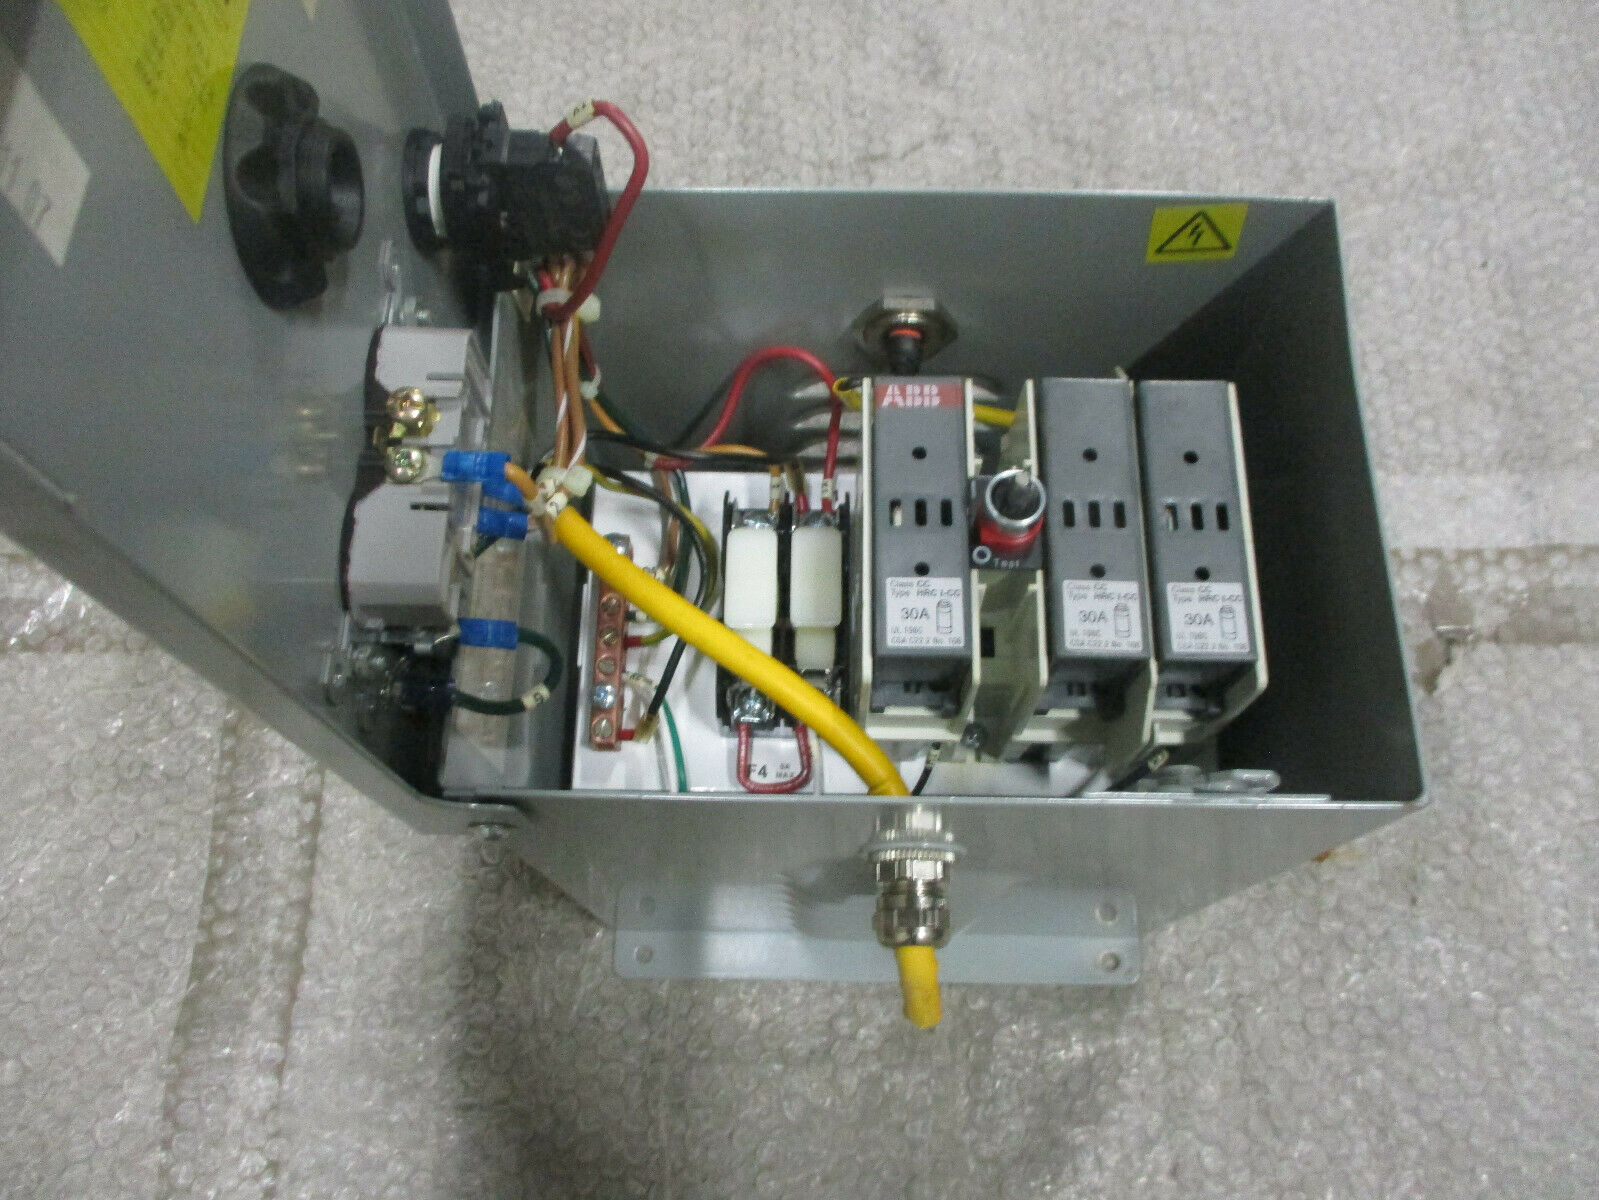 Details about   Daykin Electric GMDGTA-13 Transformer Disconnect 750VA 480VAC To 120VAC *TESTED* 